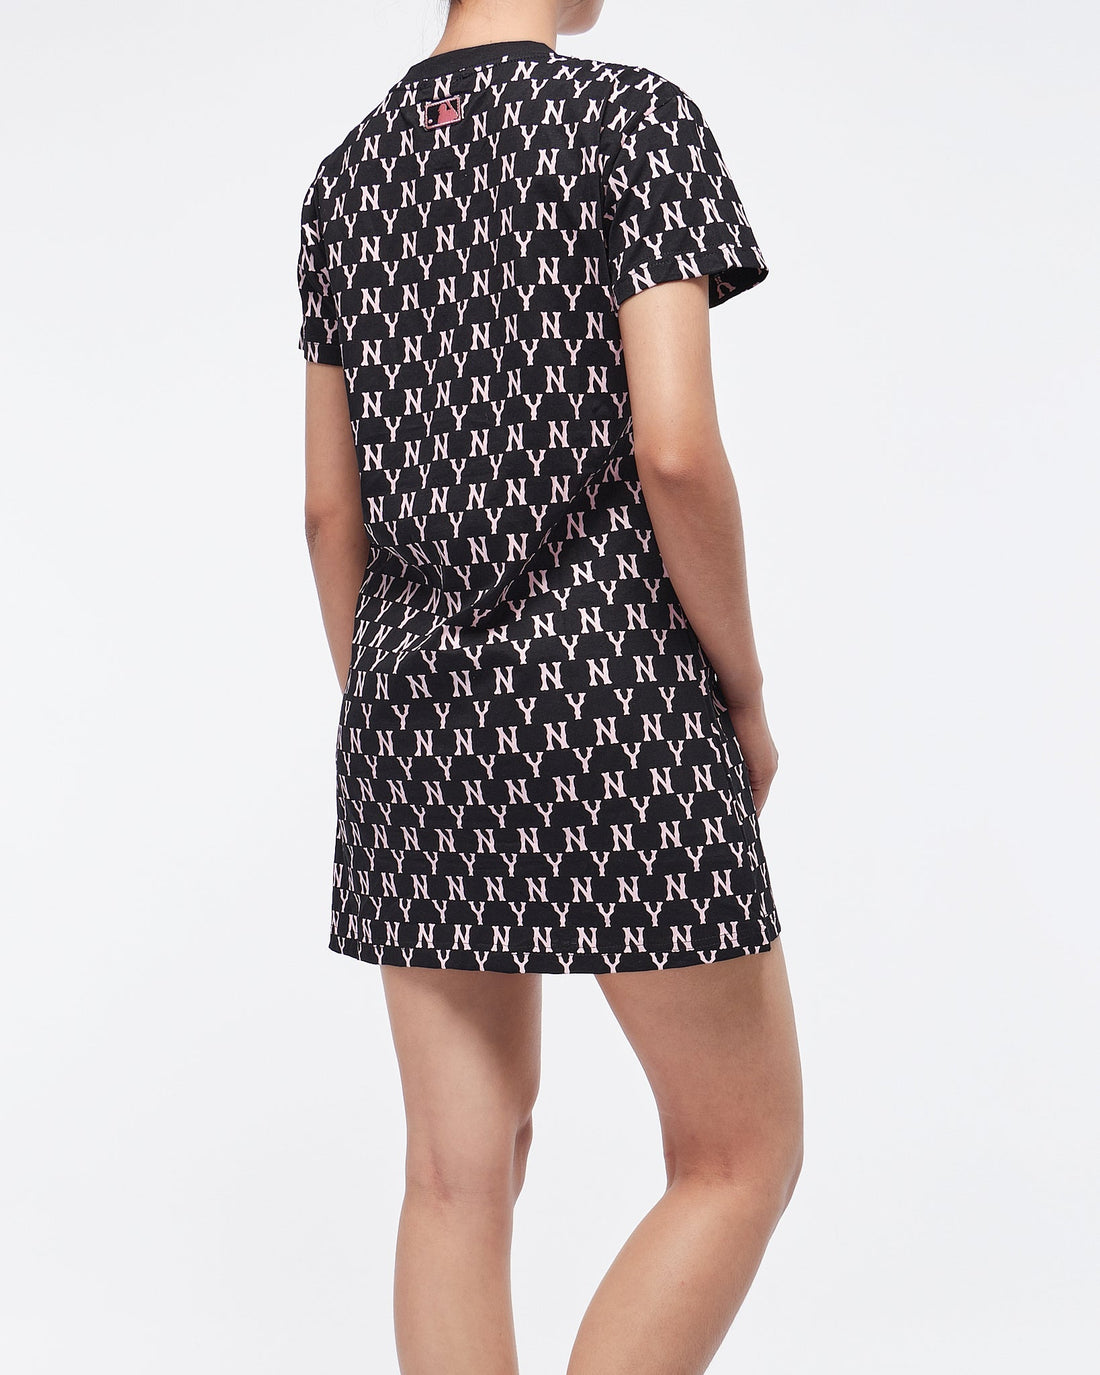 MOI OUTFIT-NY Monogram Over Printed Lady T-Shirt Dress 22.90